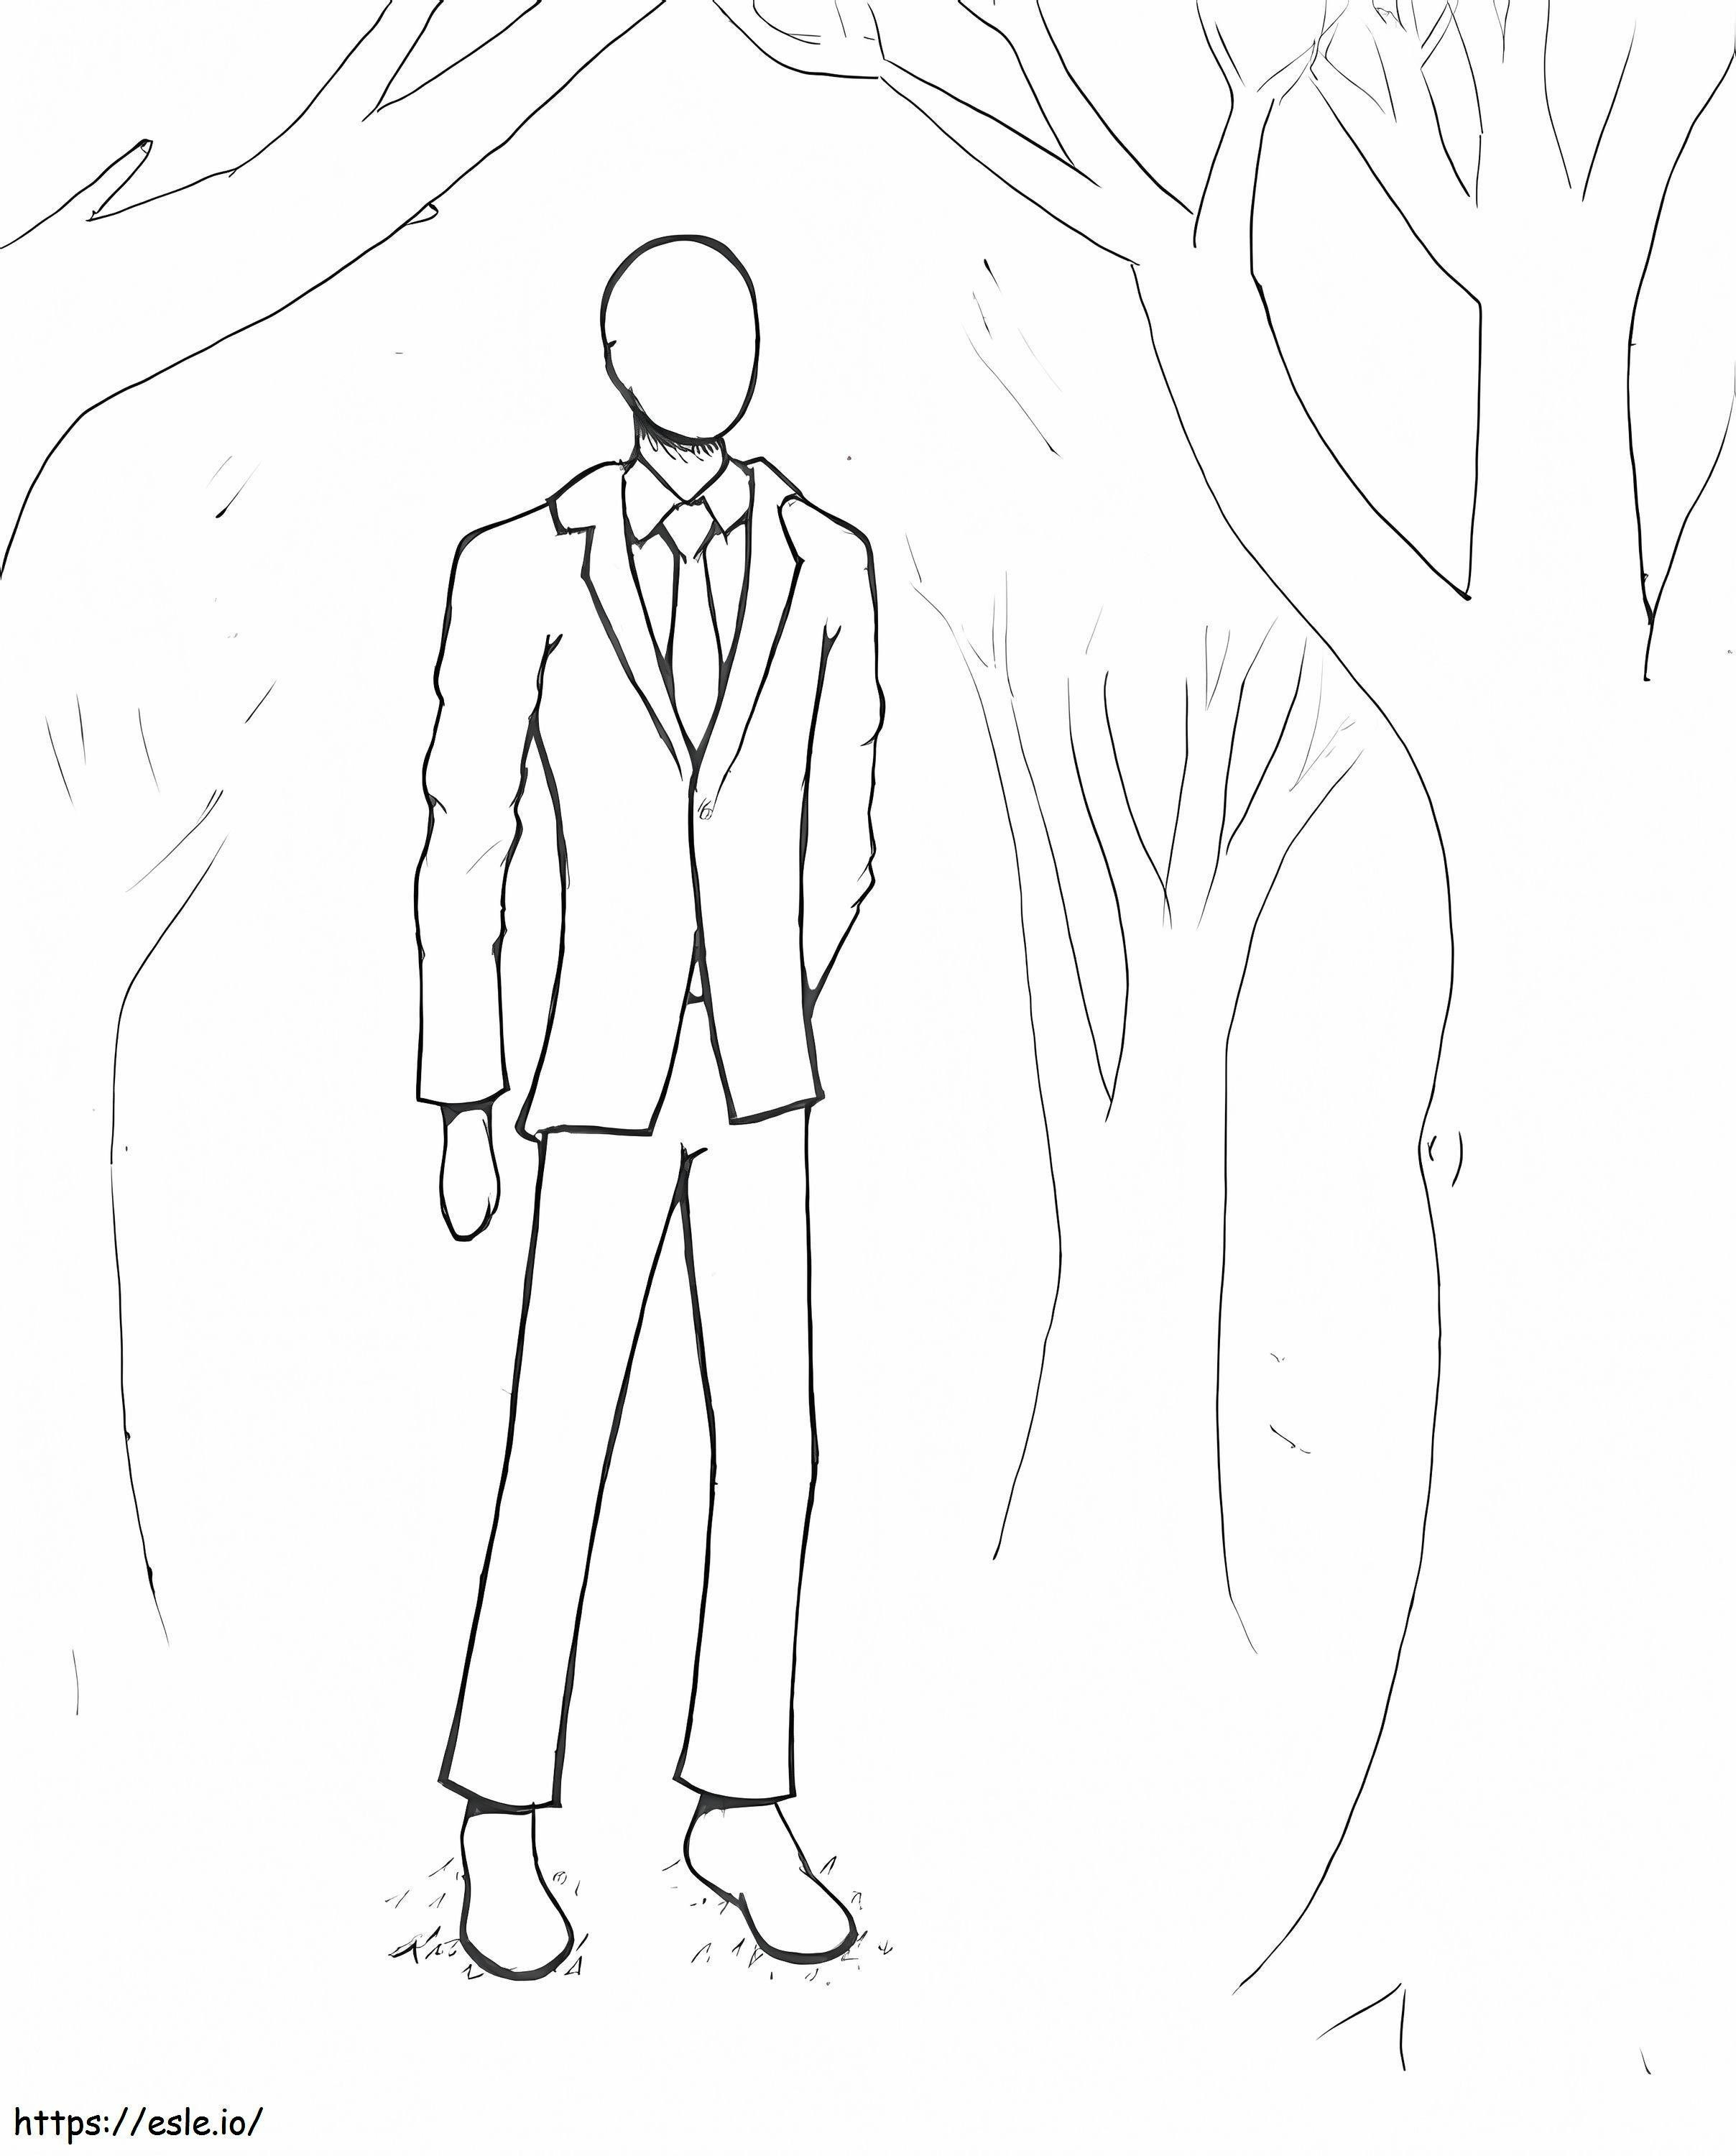 Slender Man In The Wood coloring page